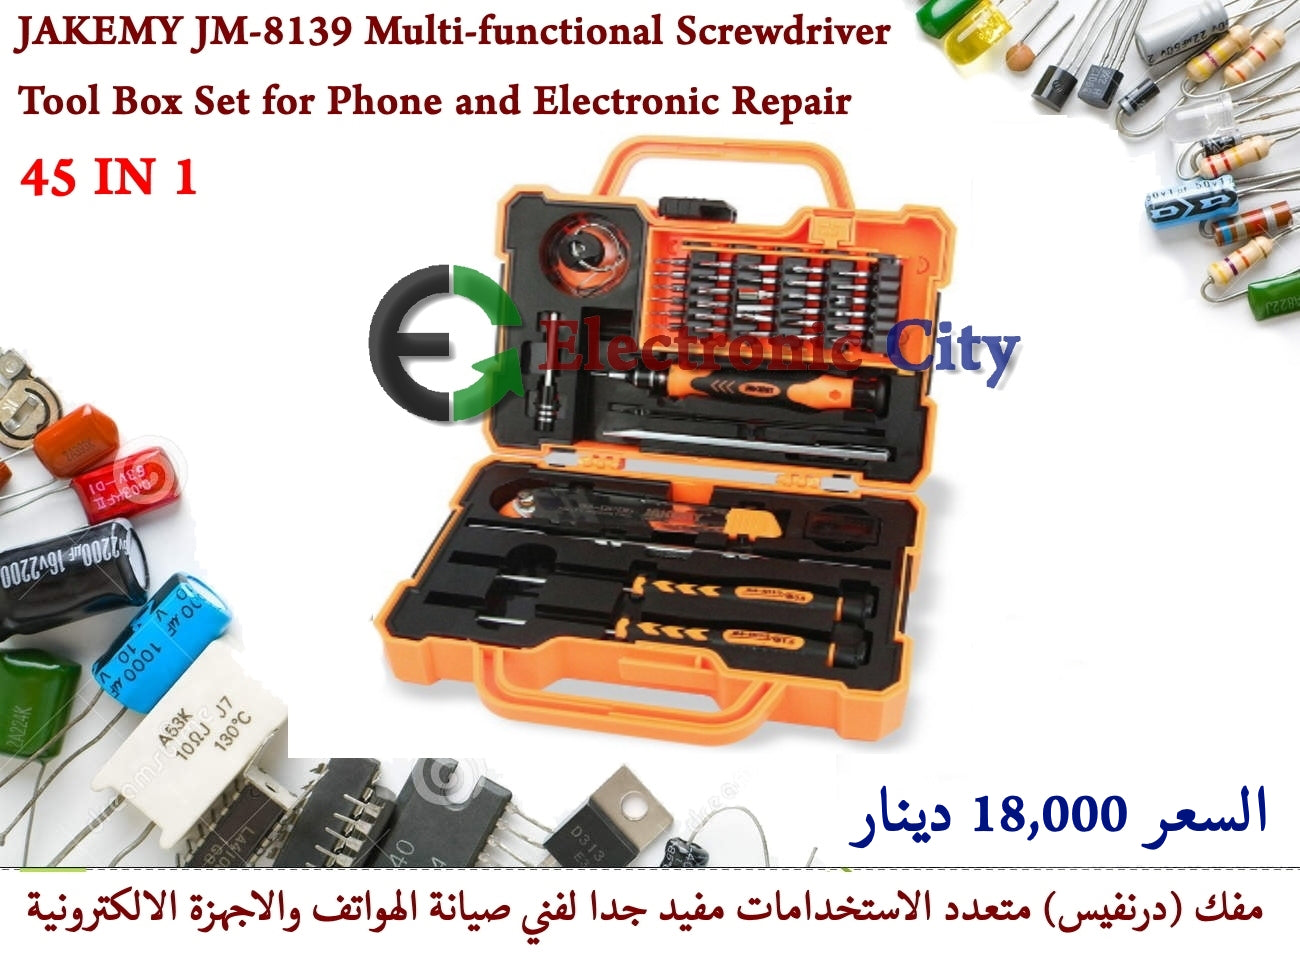 JAKEMY JM-8139 Multi-functional Screwdriver Tool Box Set for Phone and Electronic Repair